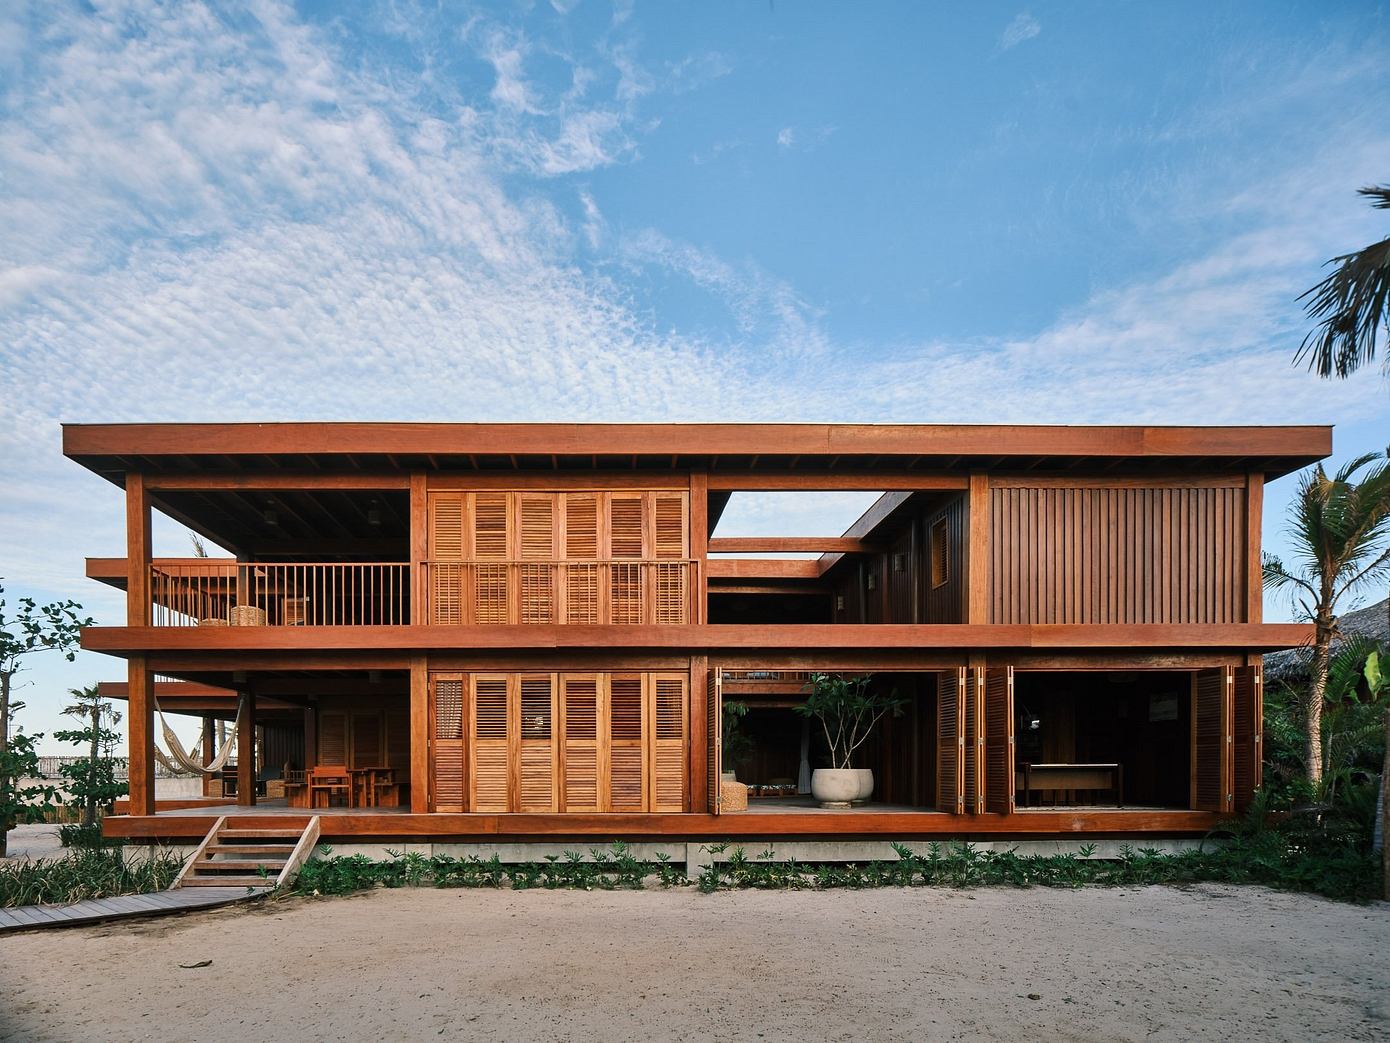 Casas Elilula: Elevated Beach Villa with Timber Megastructure